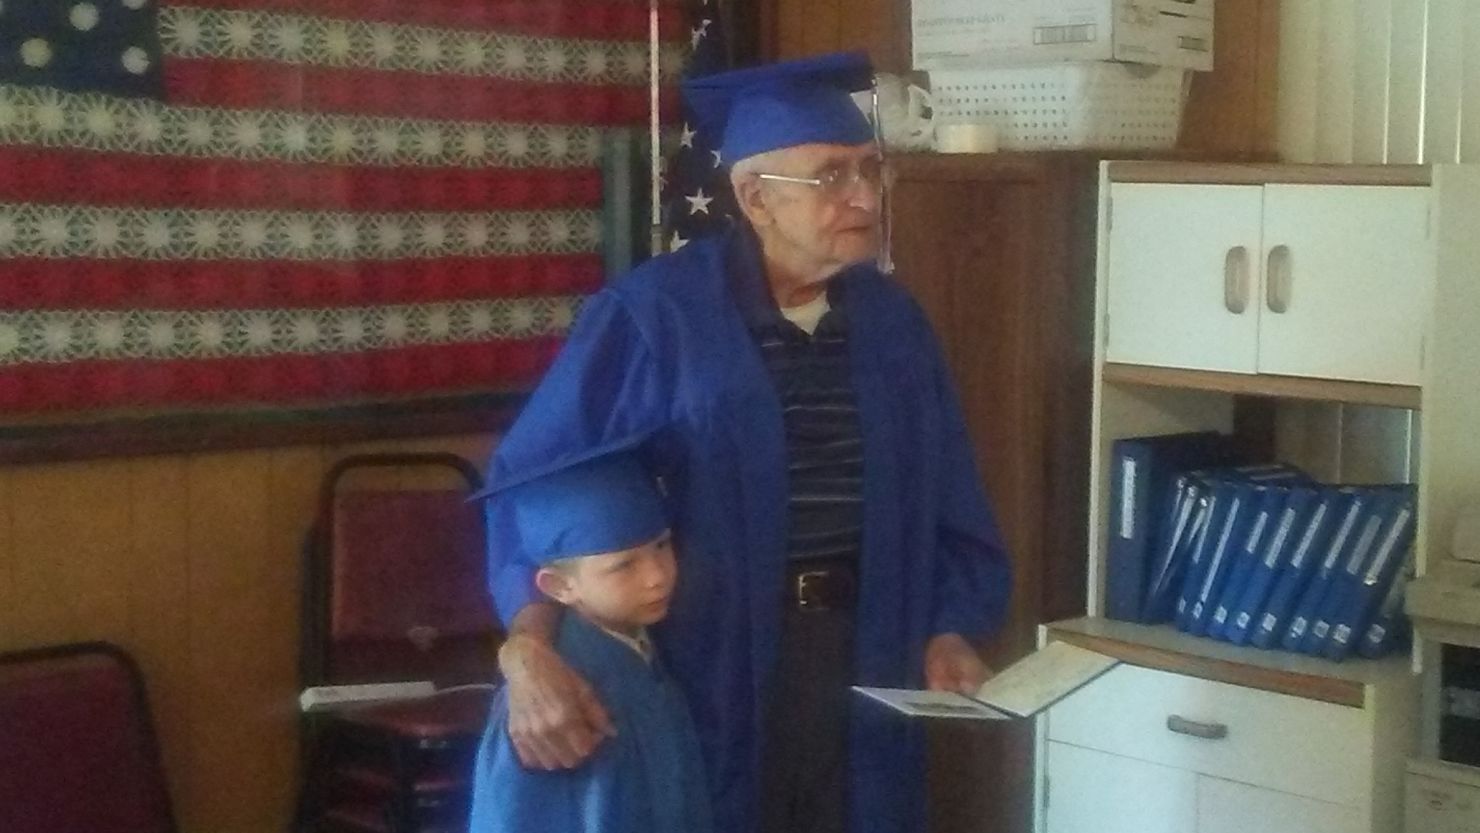 Milton Mockerman, right, finally received his high school diploma -- about 71 years after he should have been done with school.